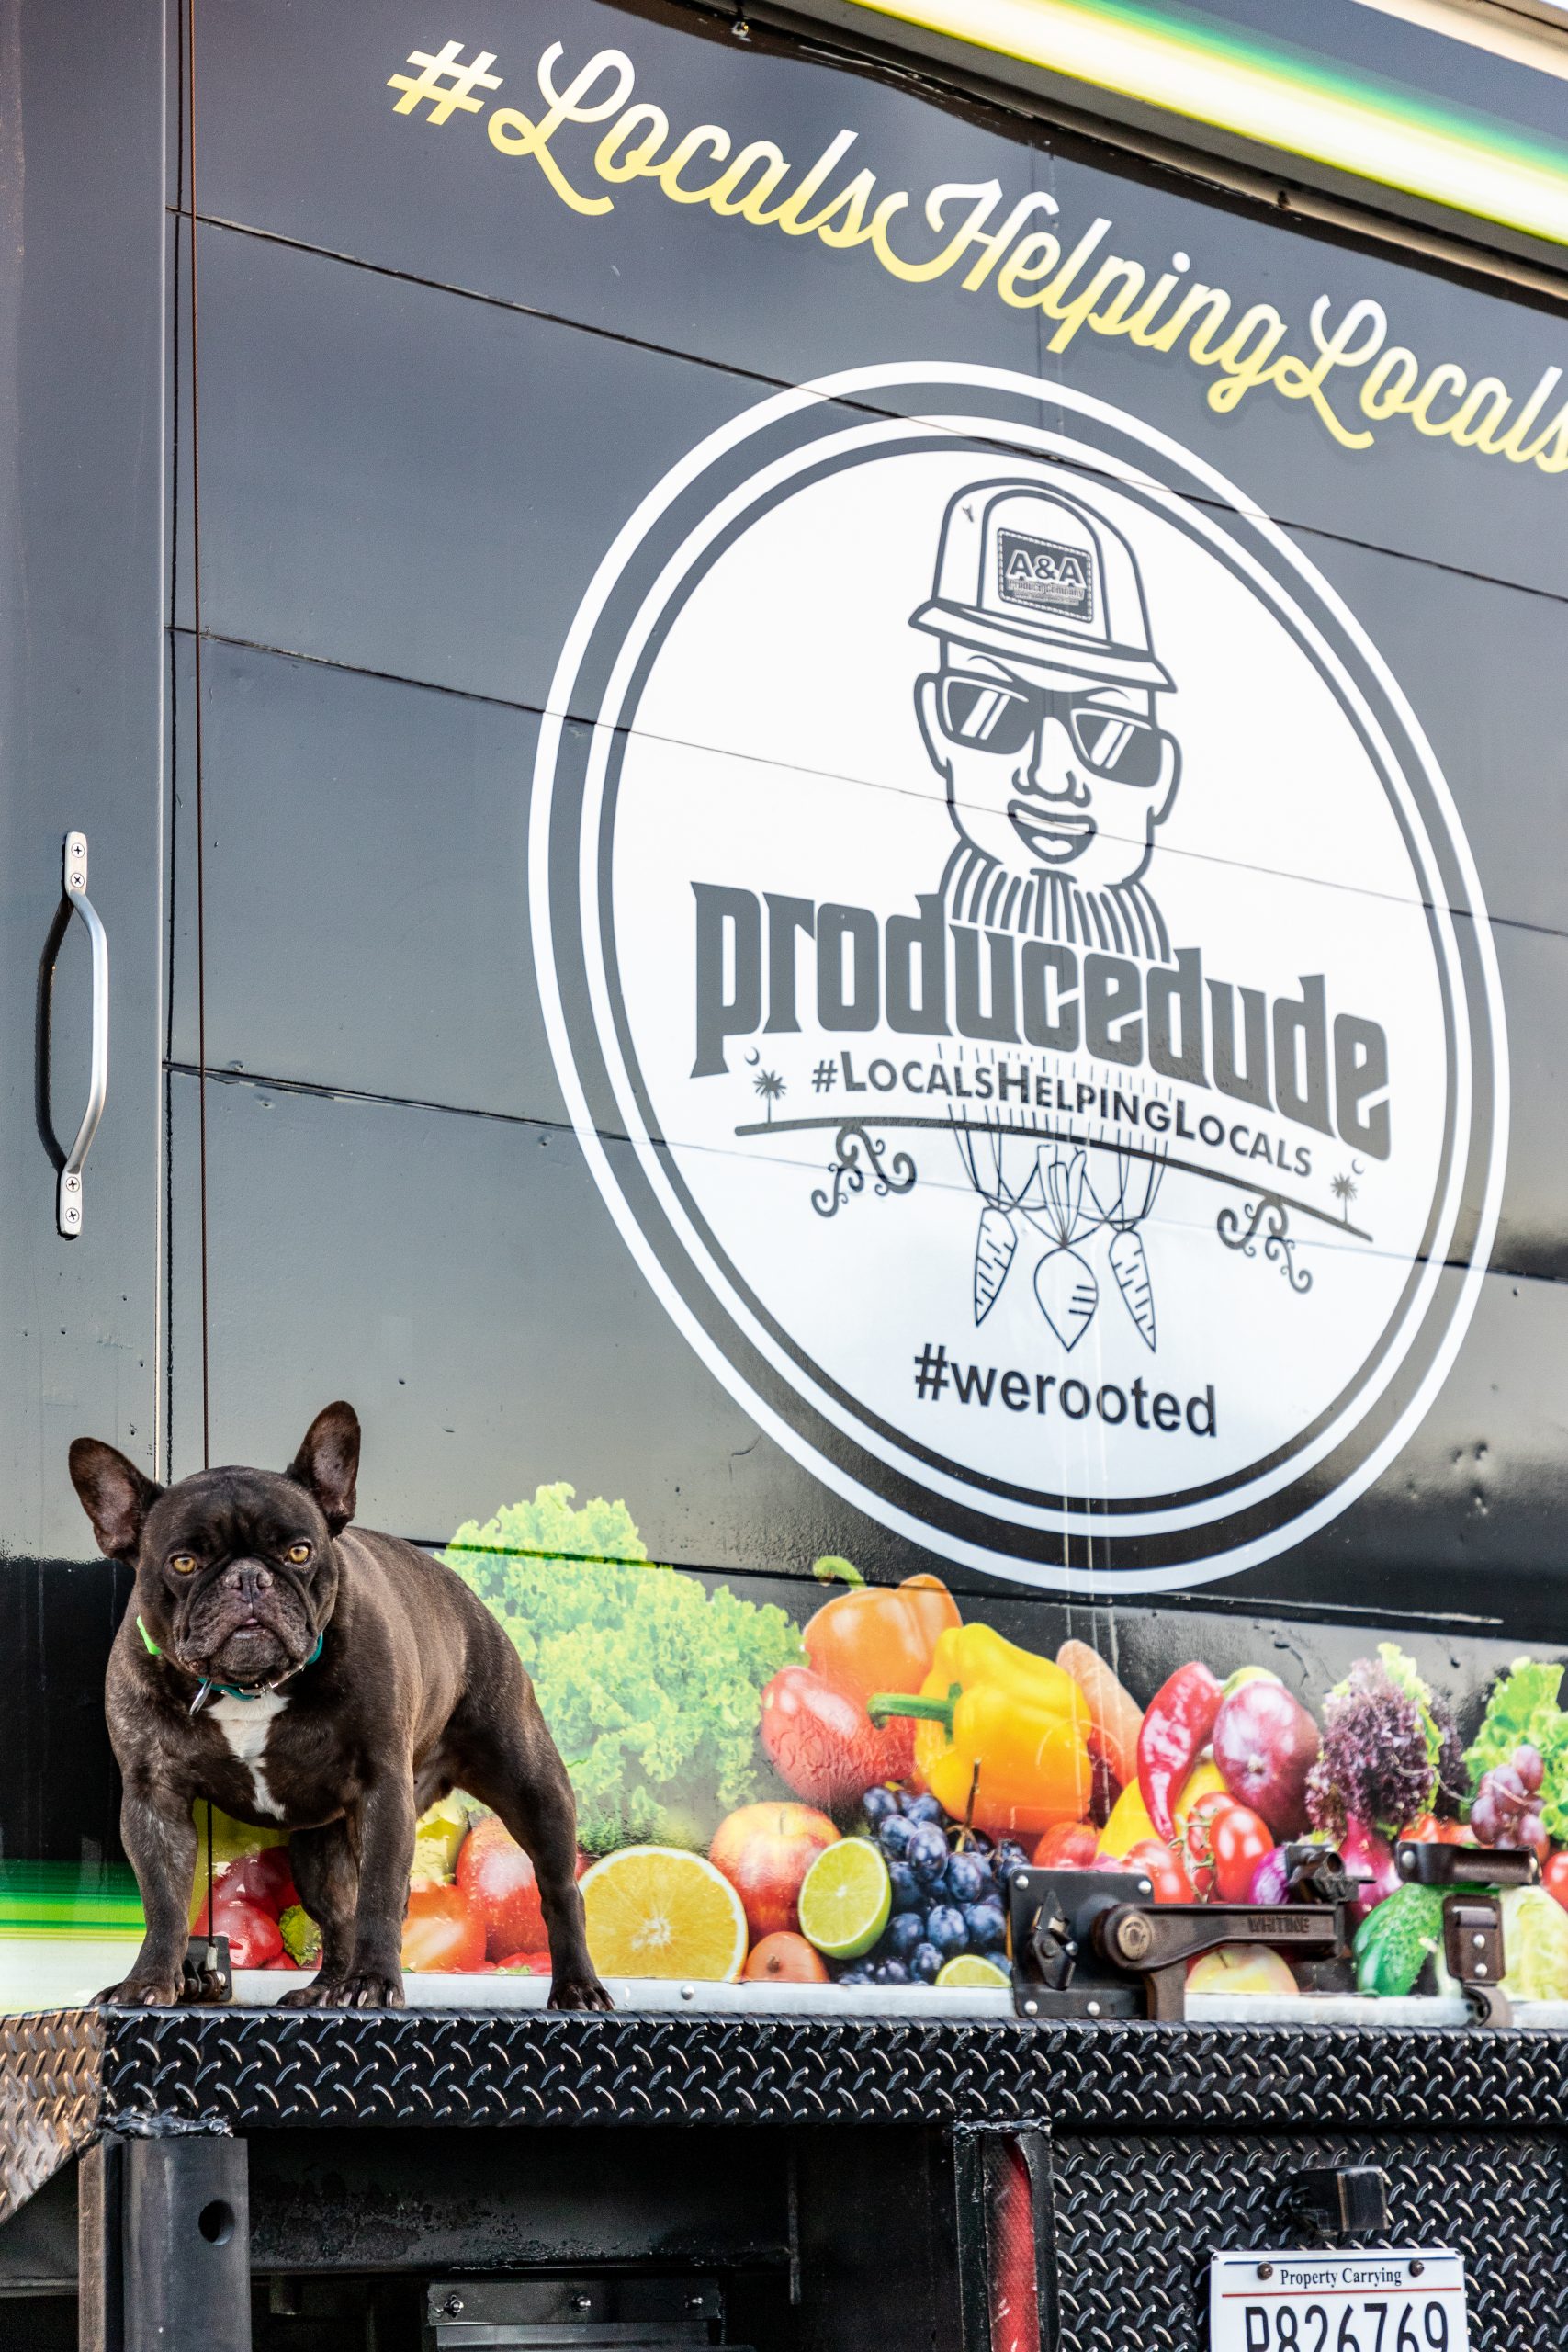 louie the producedude mascott on the A&A delivery truck